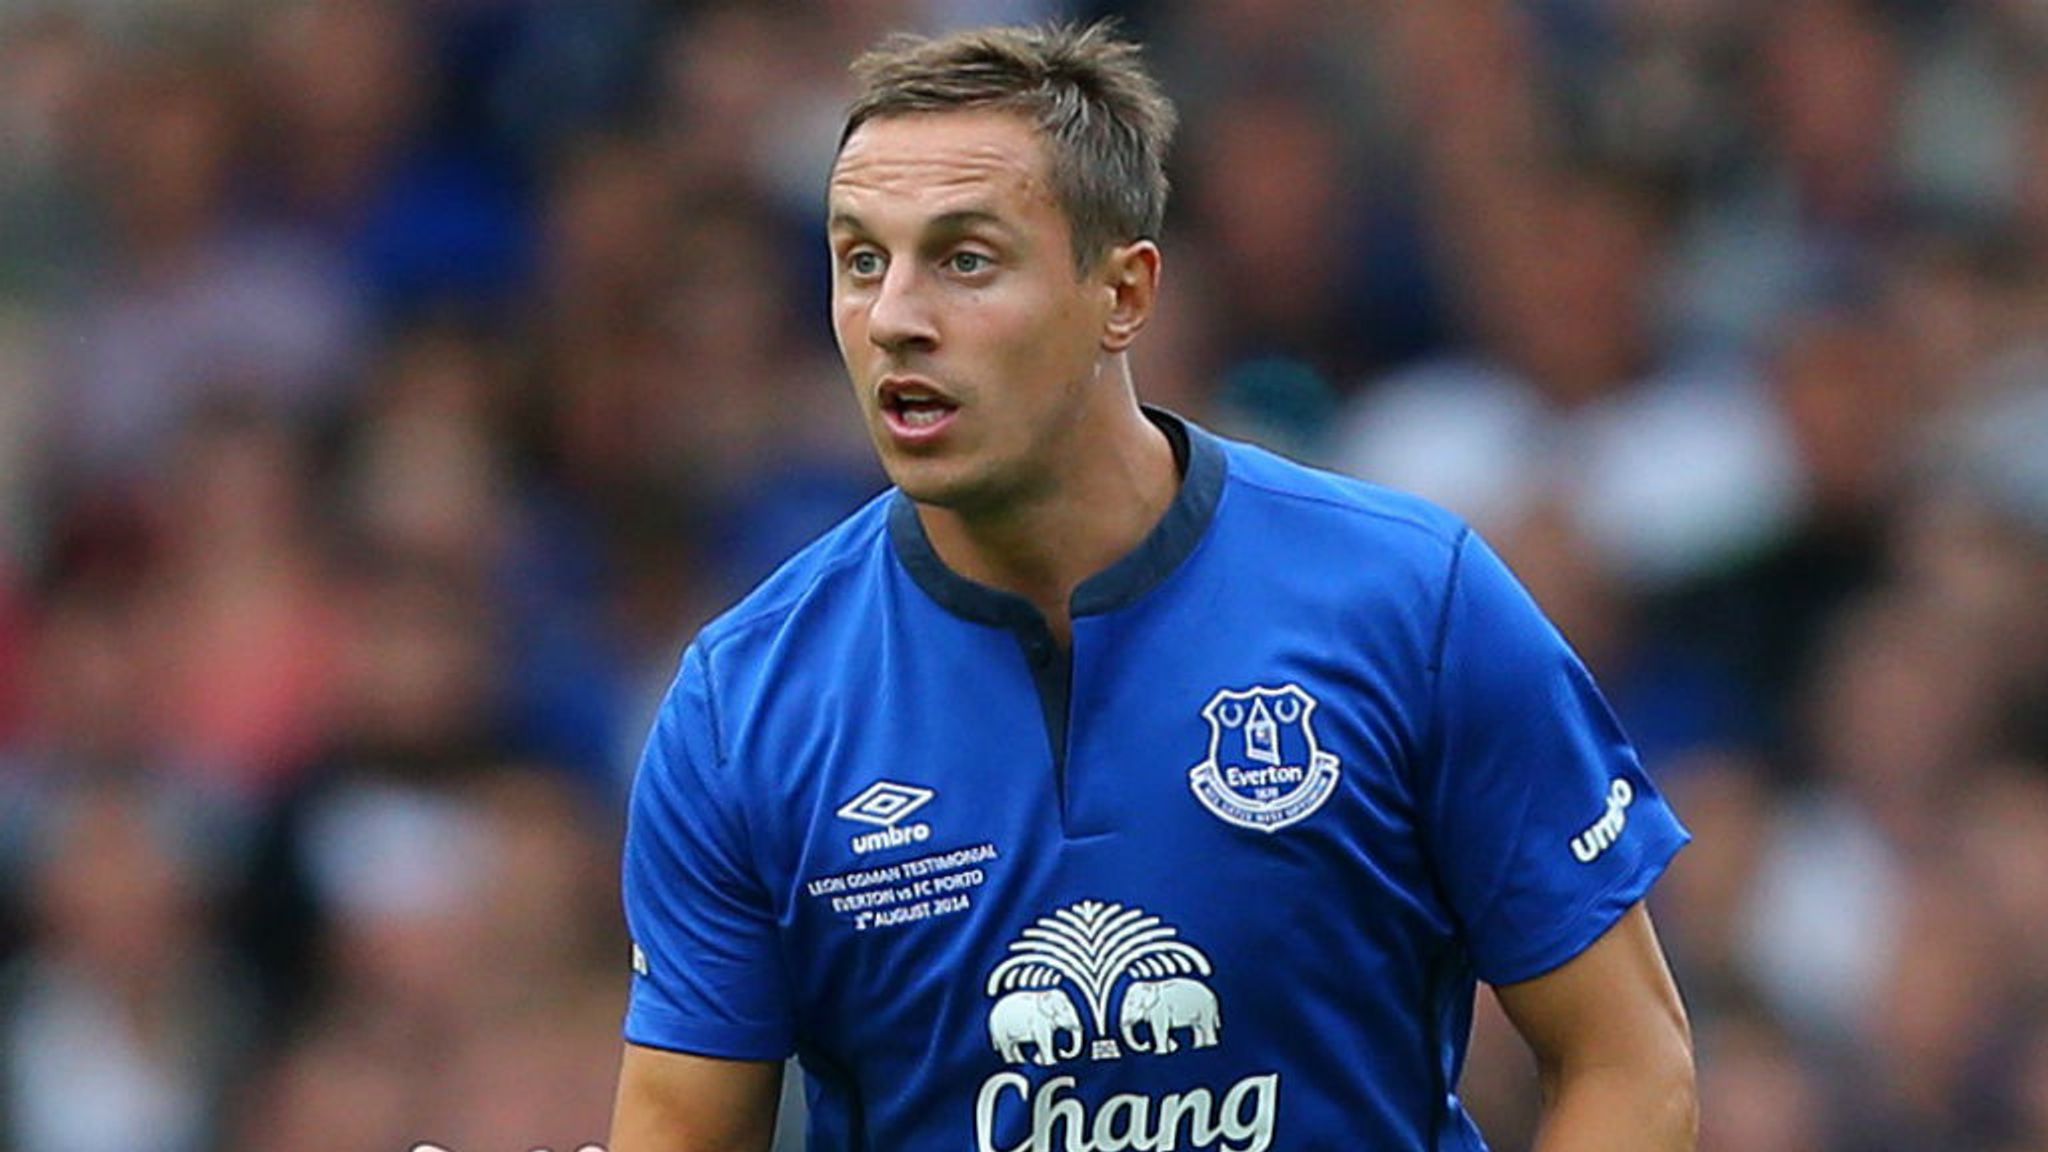 Premier League: Phil Jagielka is not guaranteed a place at Everton | Football News | Sky Sports